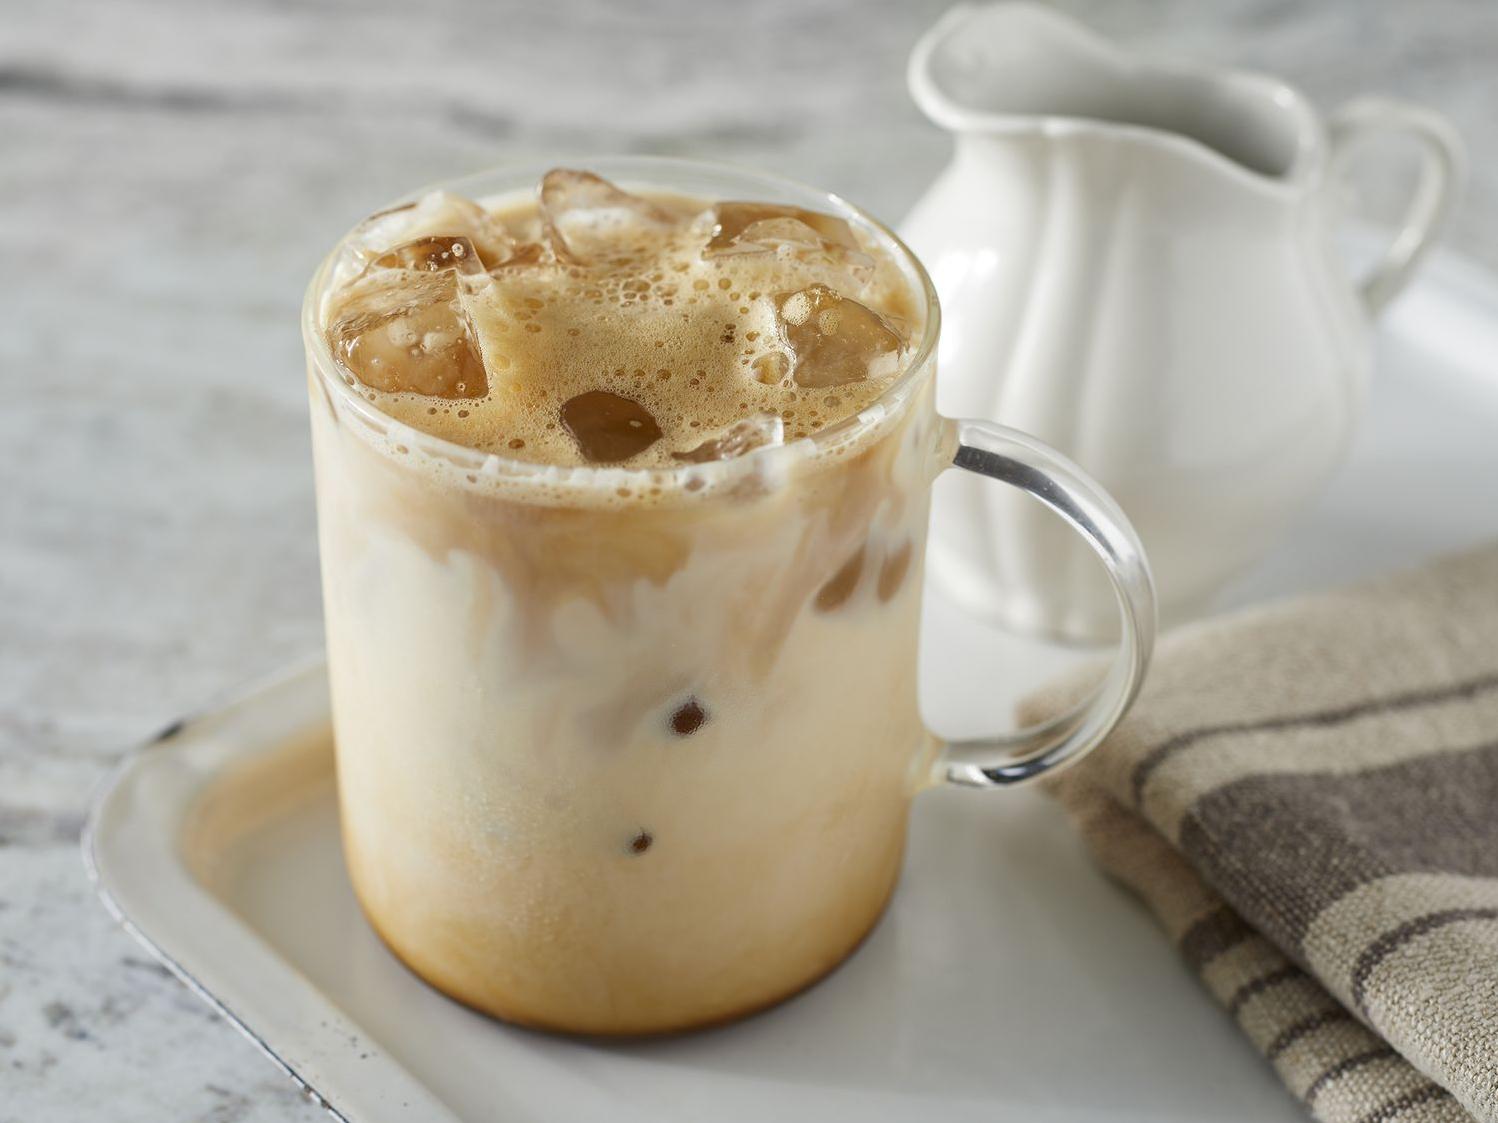  Life is too short for bad coffee, so make it iced and enjoy every sip